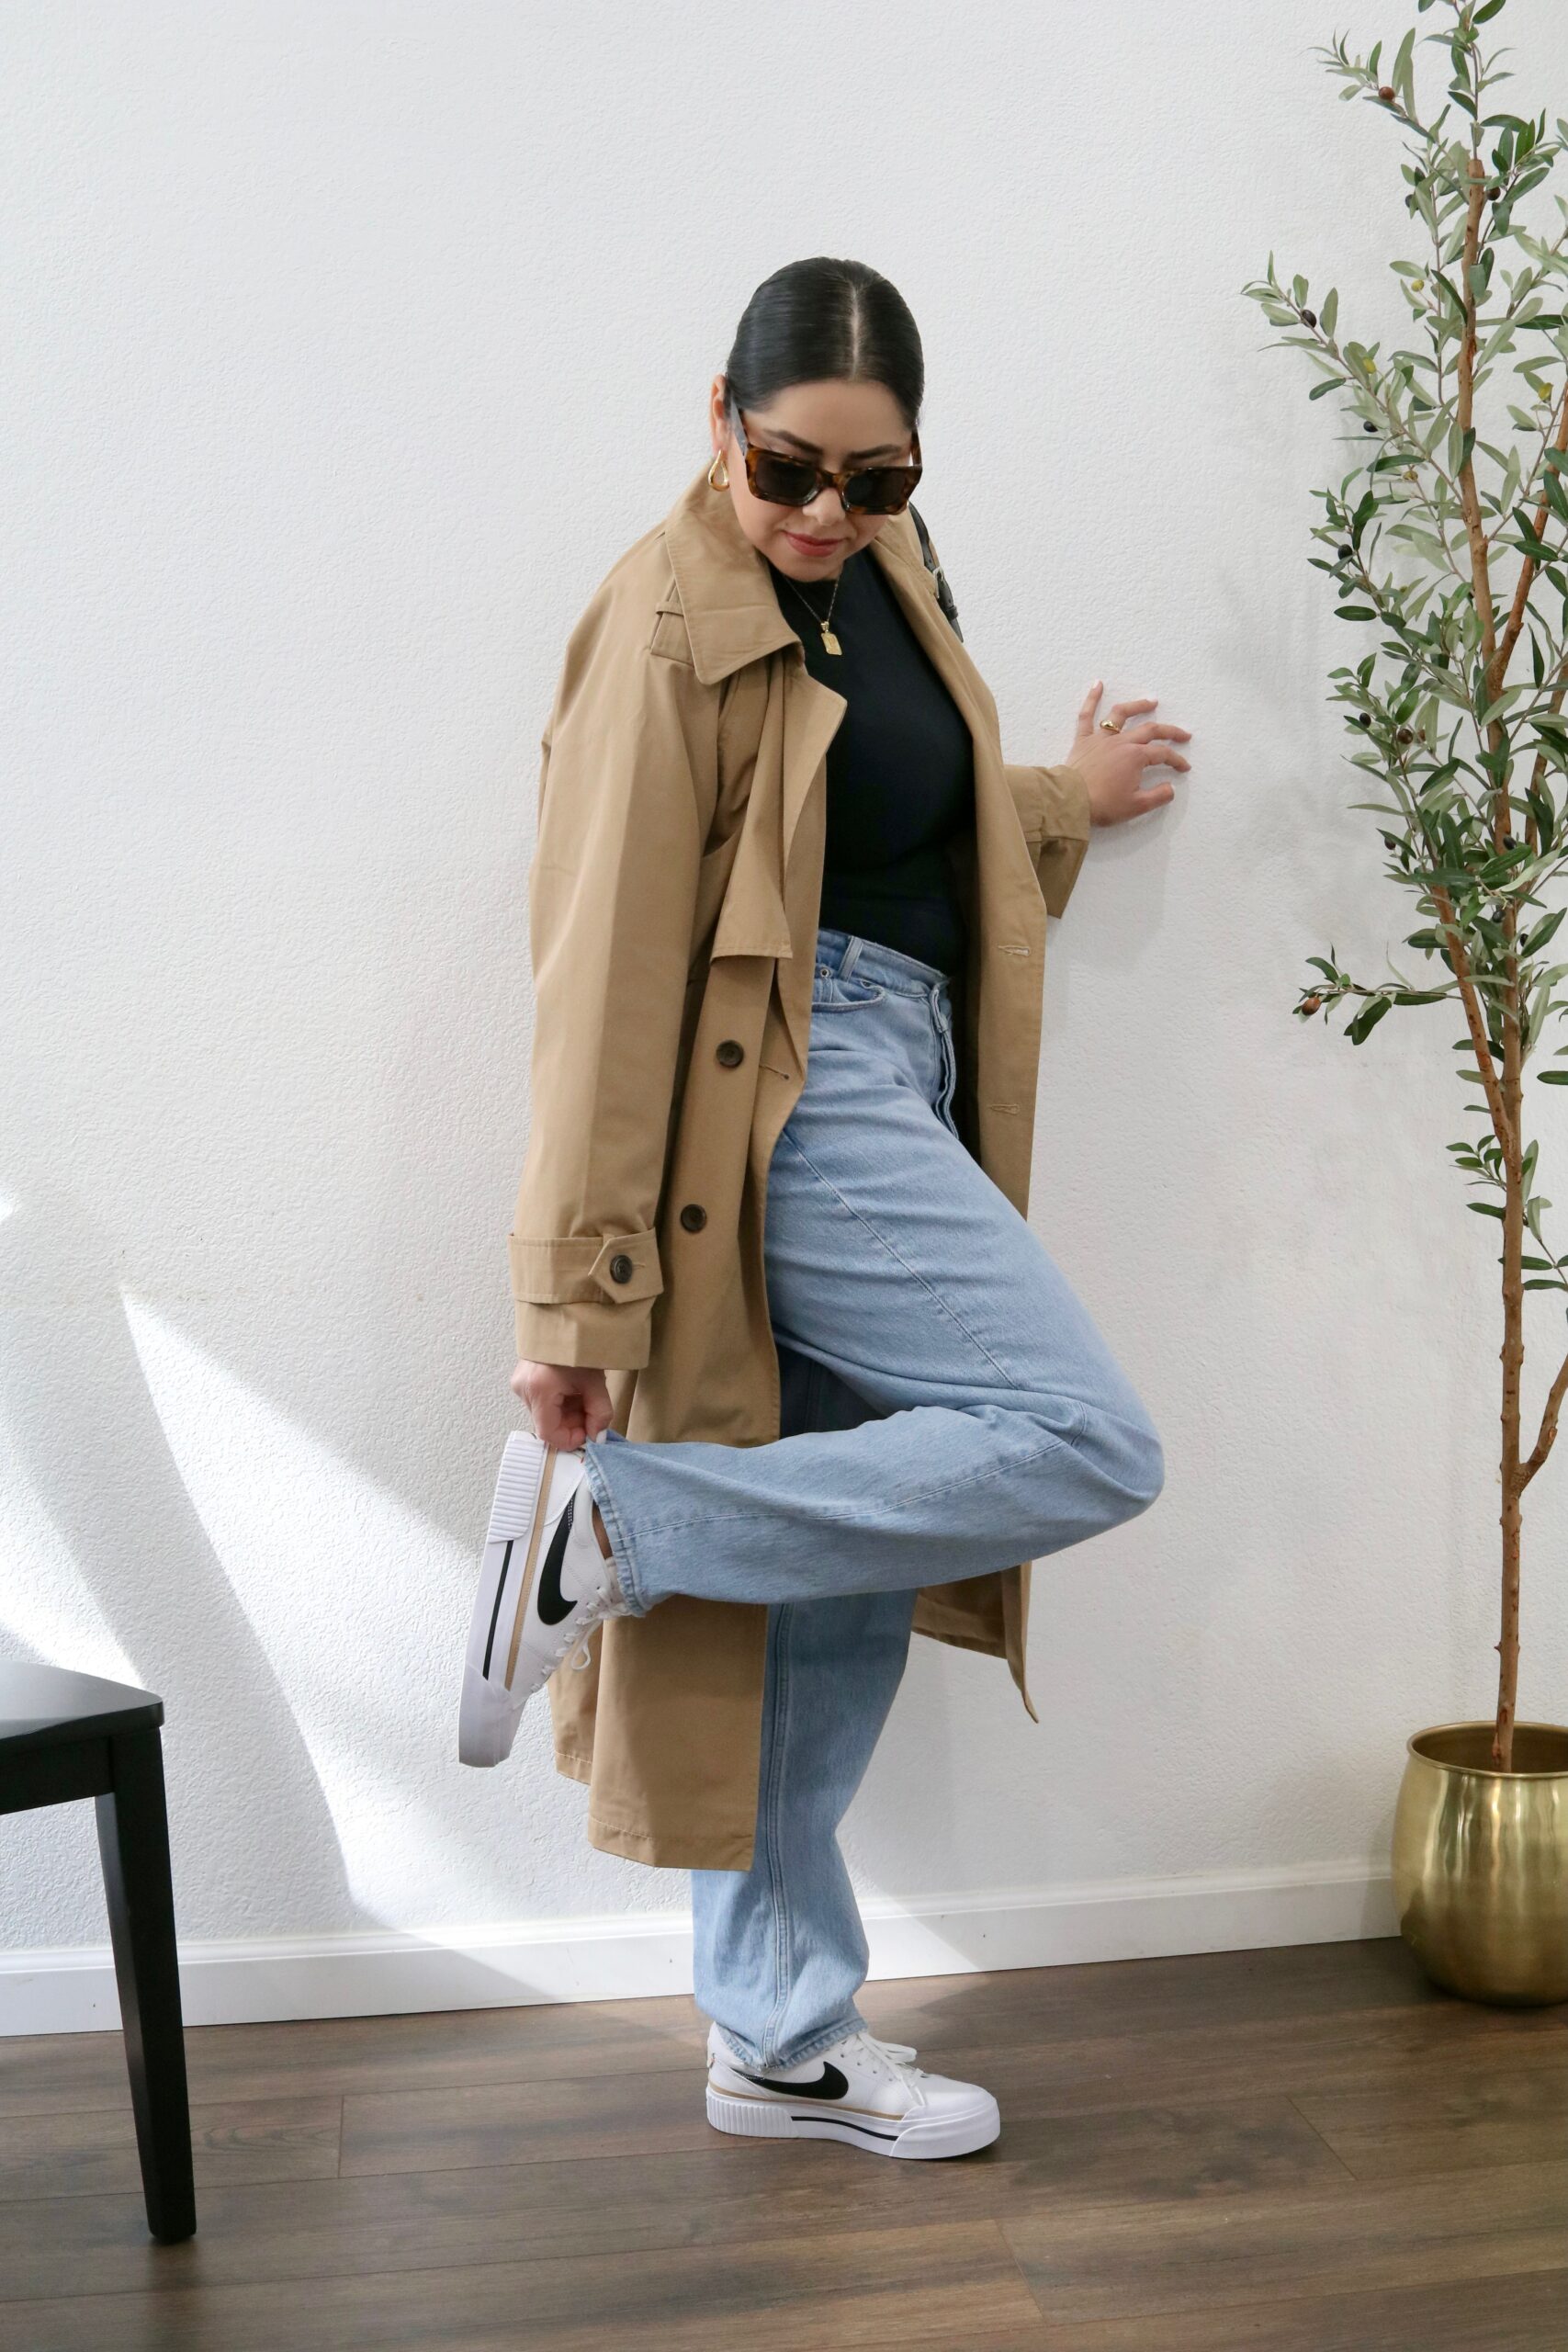 casual spring outfit with sneakers, how to style a trench coat for spring, how to wear sneakers in a chic way